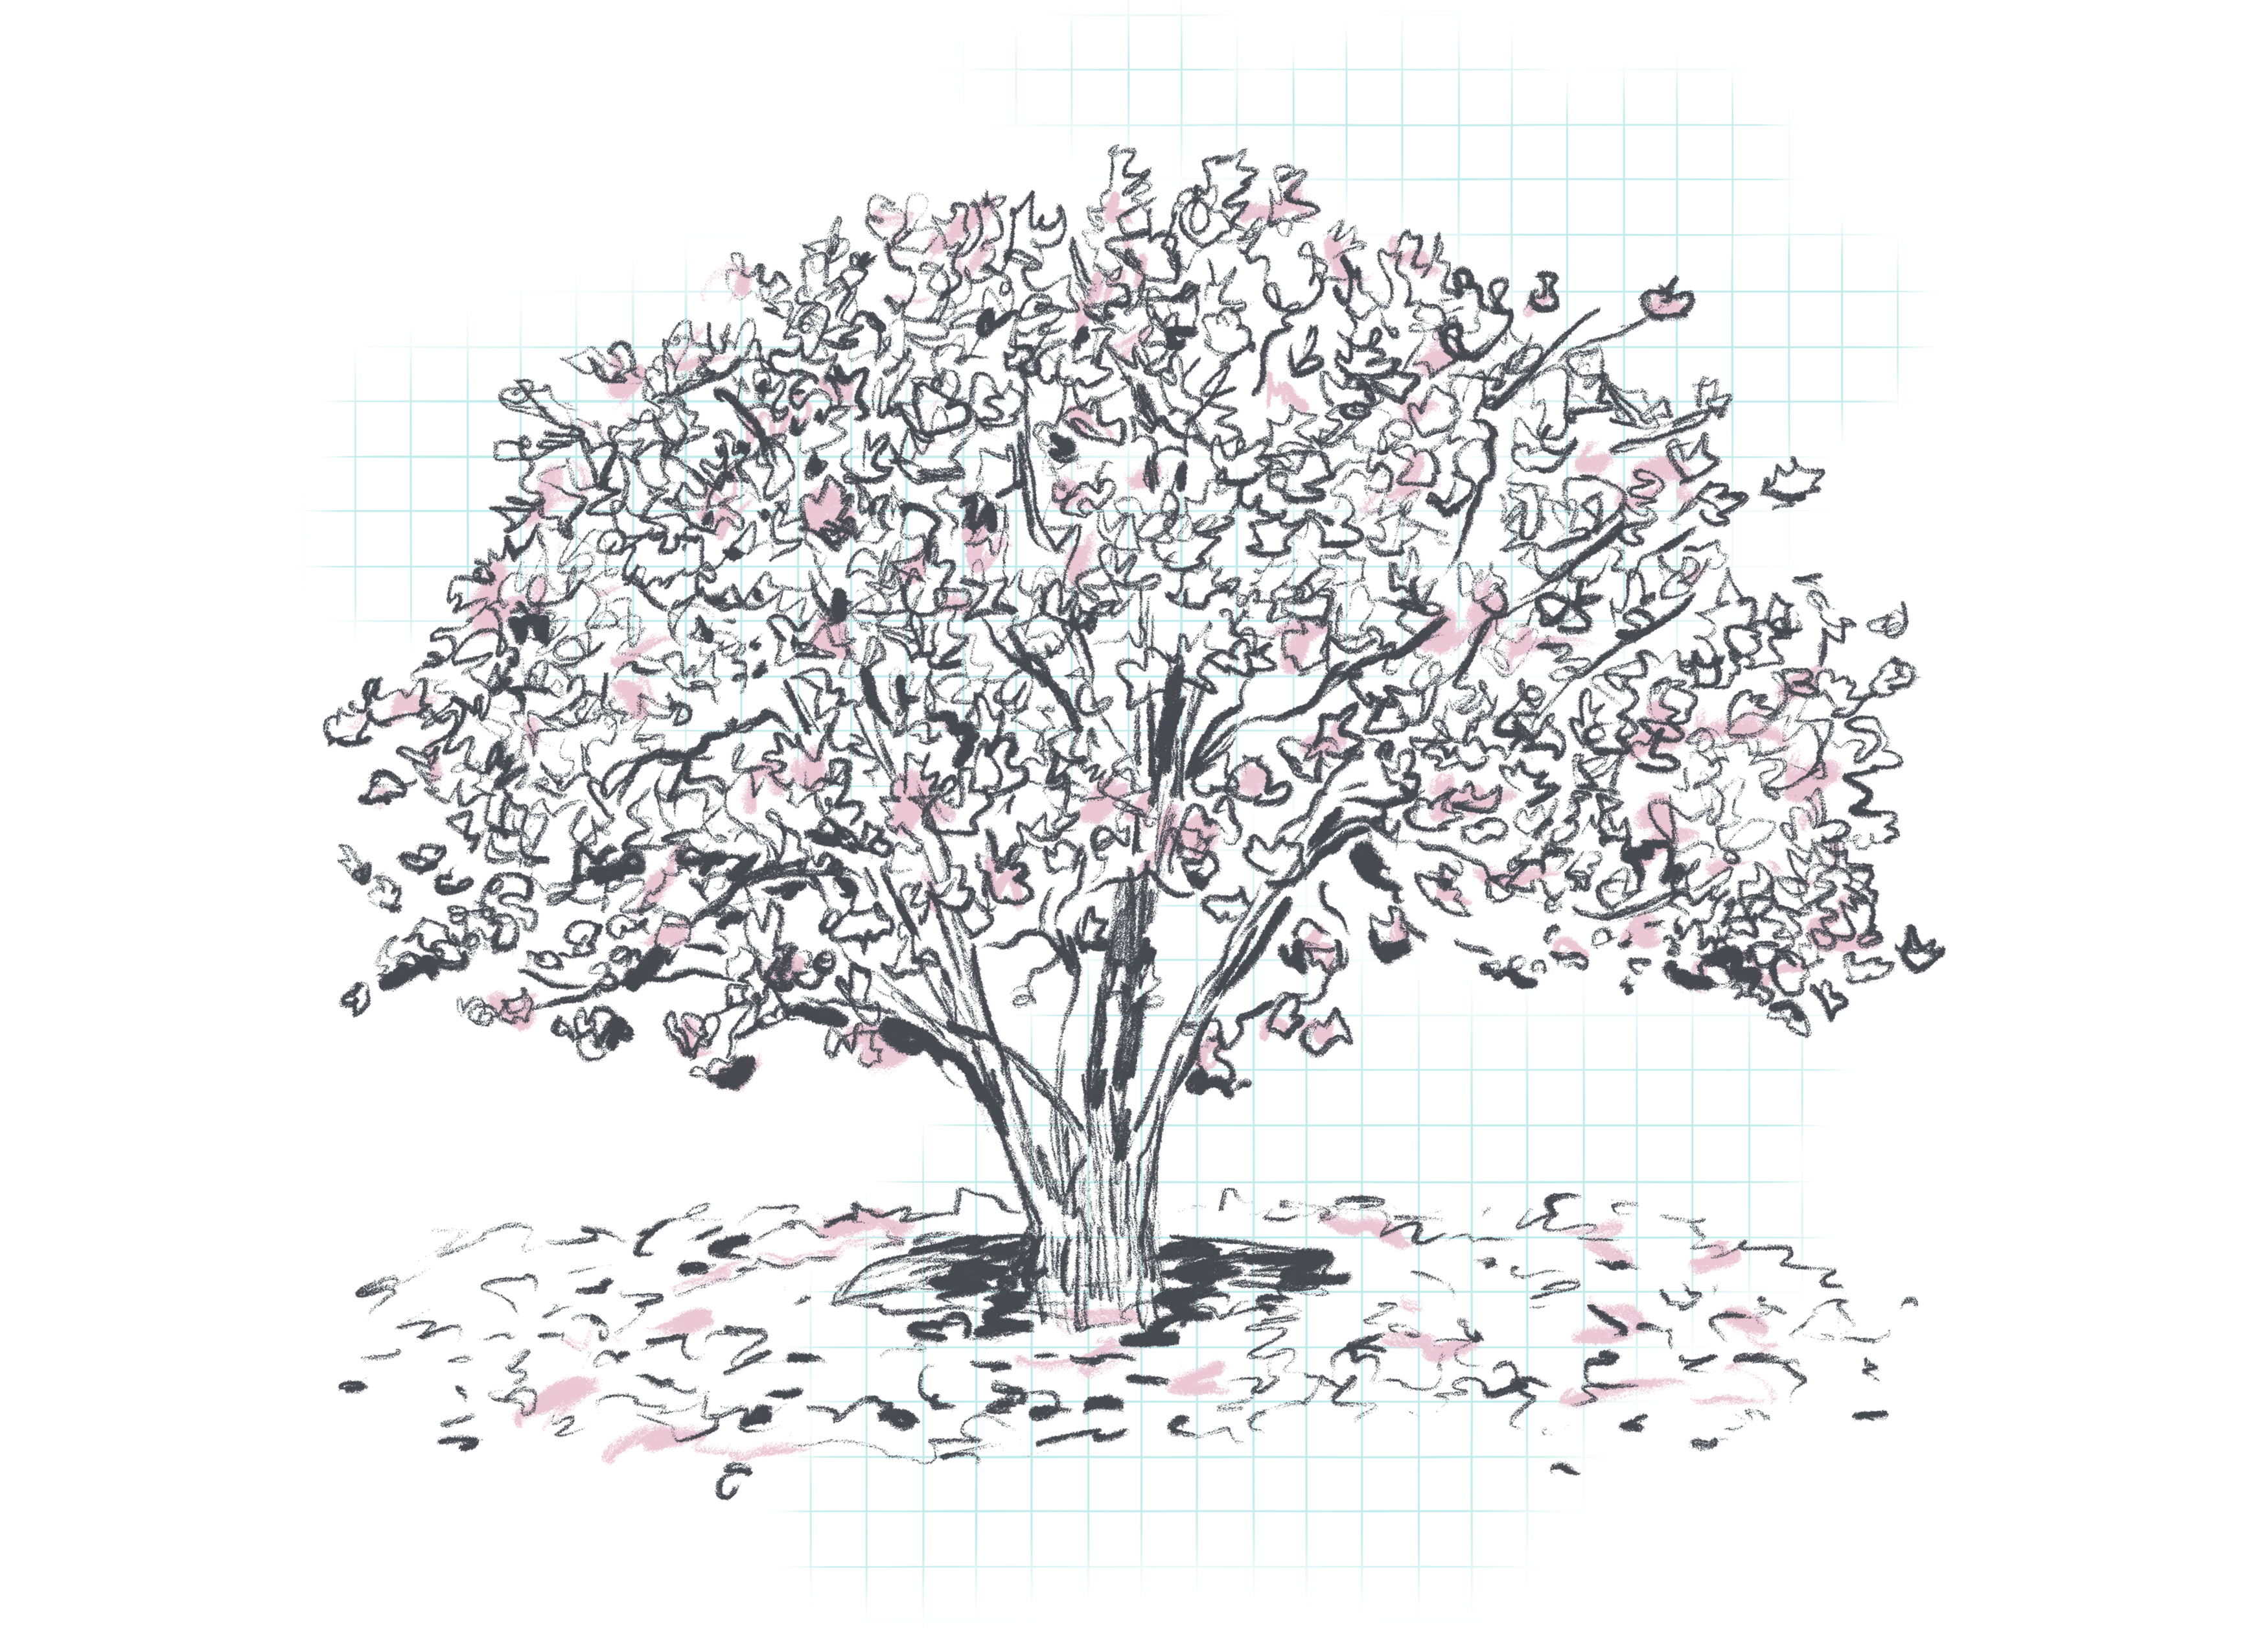 a sketchy illustration of a magnolia tree in bloom with pink petals scattered on the ground